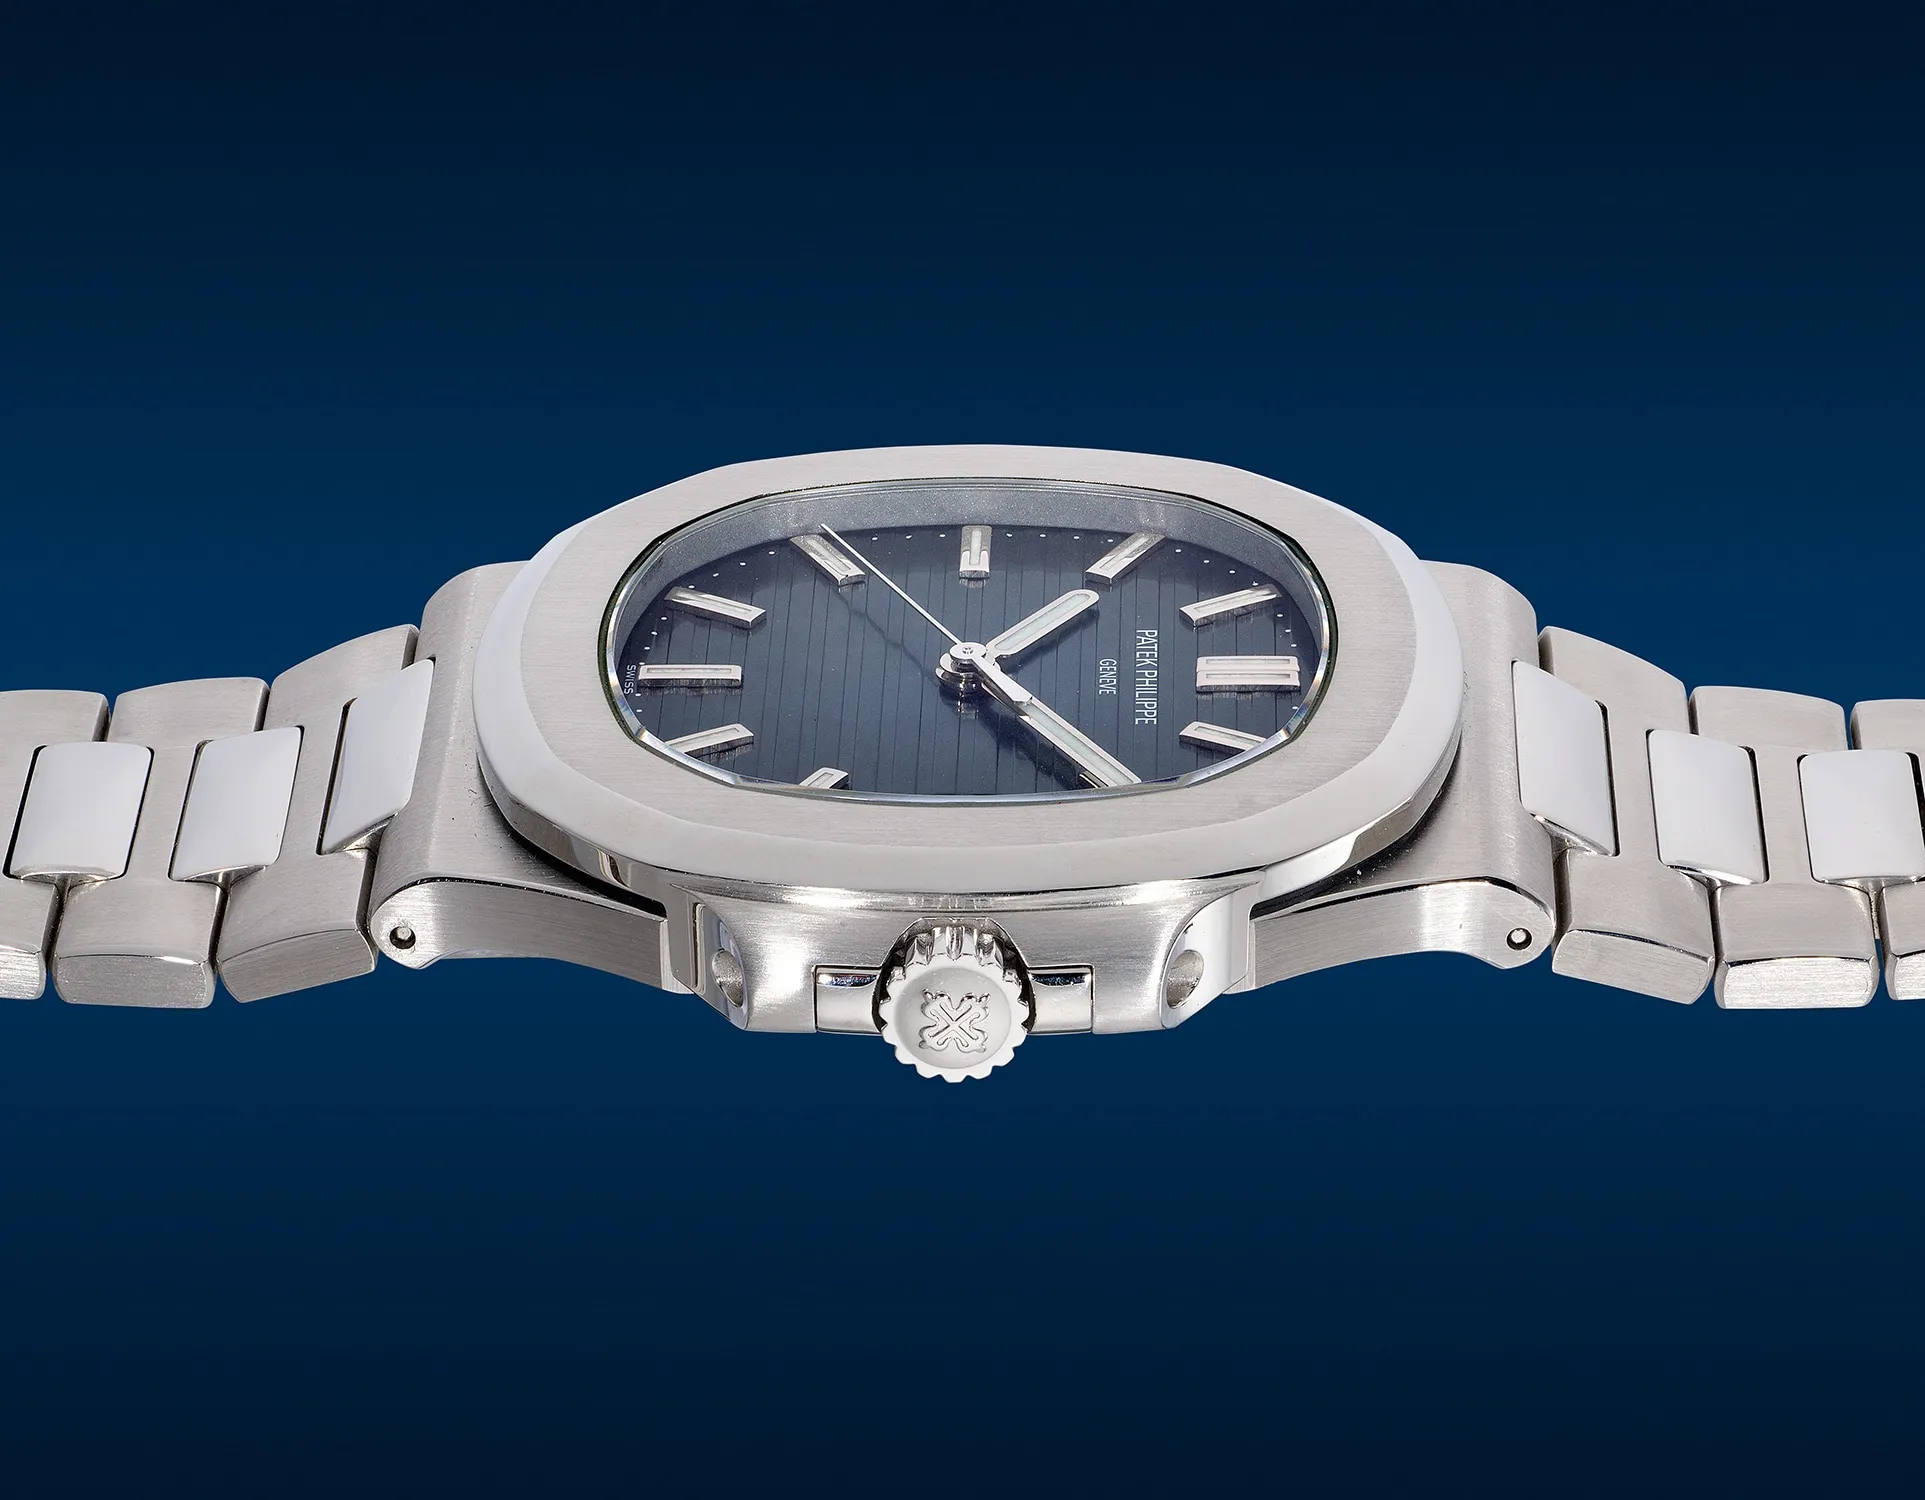 Patek Philippe Nautilus 5711/1A-010 40mm Stainless steel Blue 3